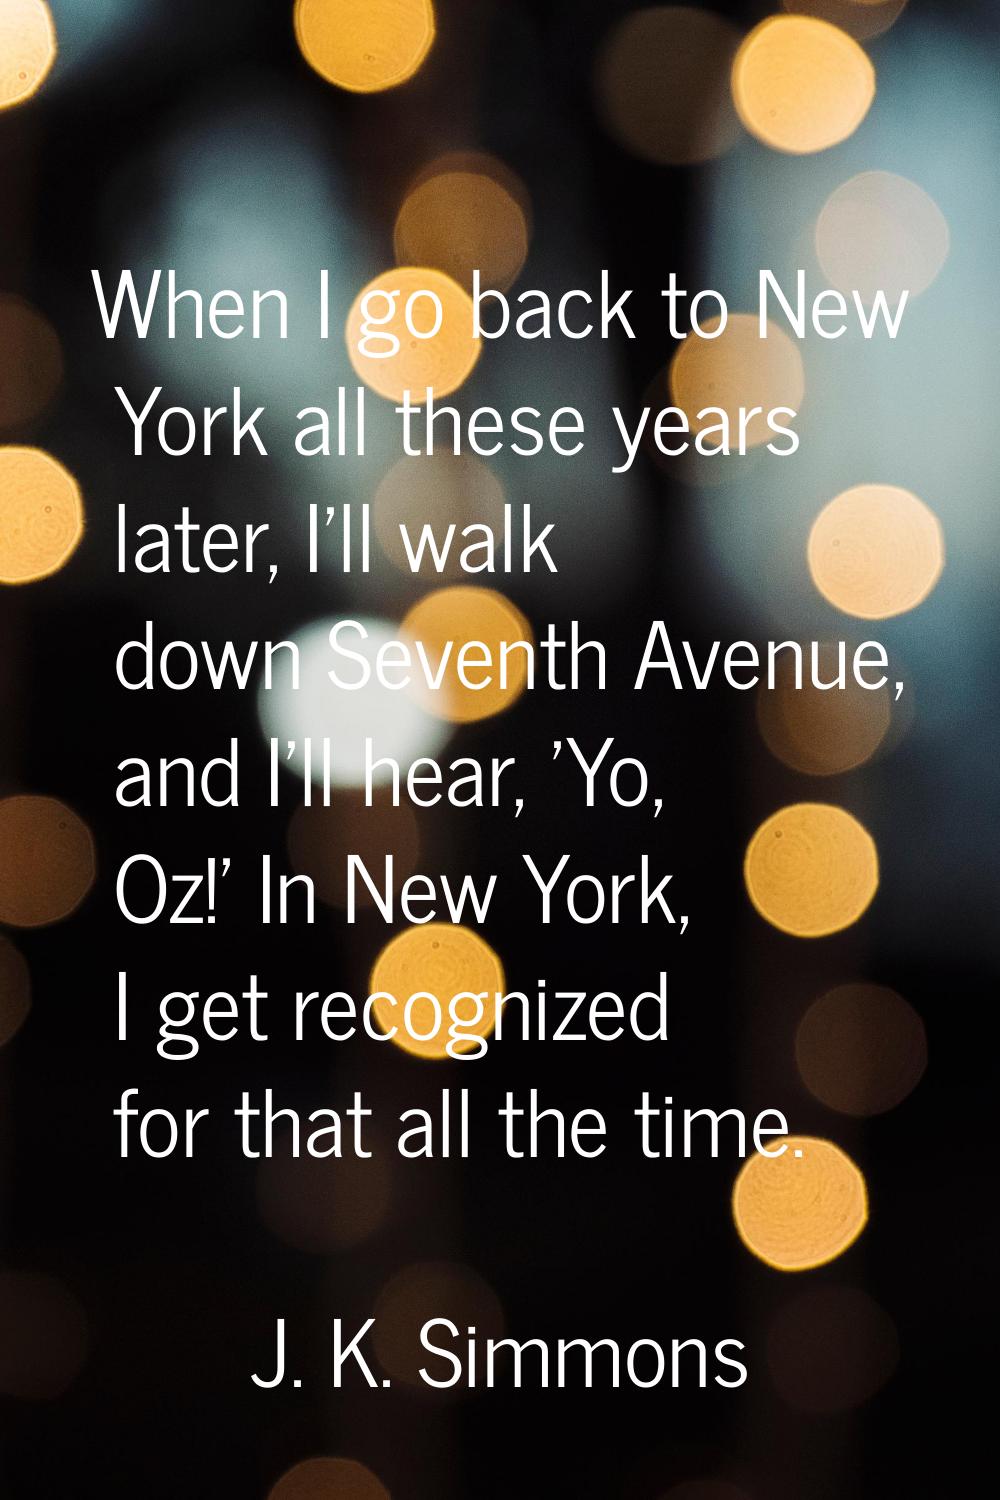 When I go back to New York all these years later, I'll walk down Seventh Avenue, and I'll hear, 'Yo